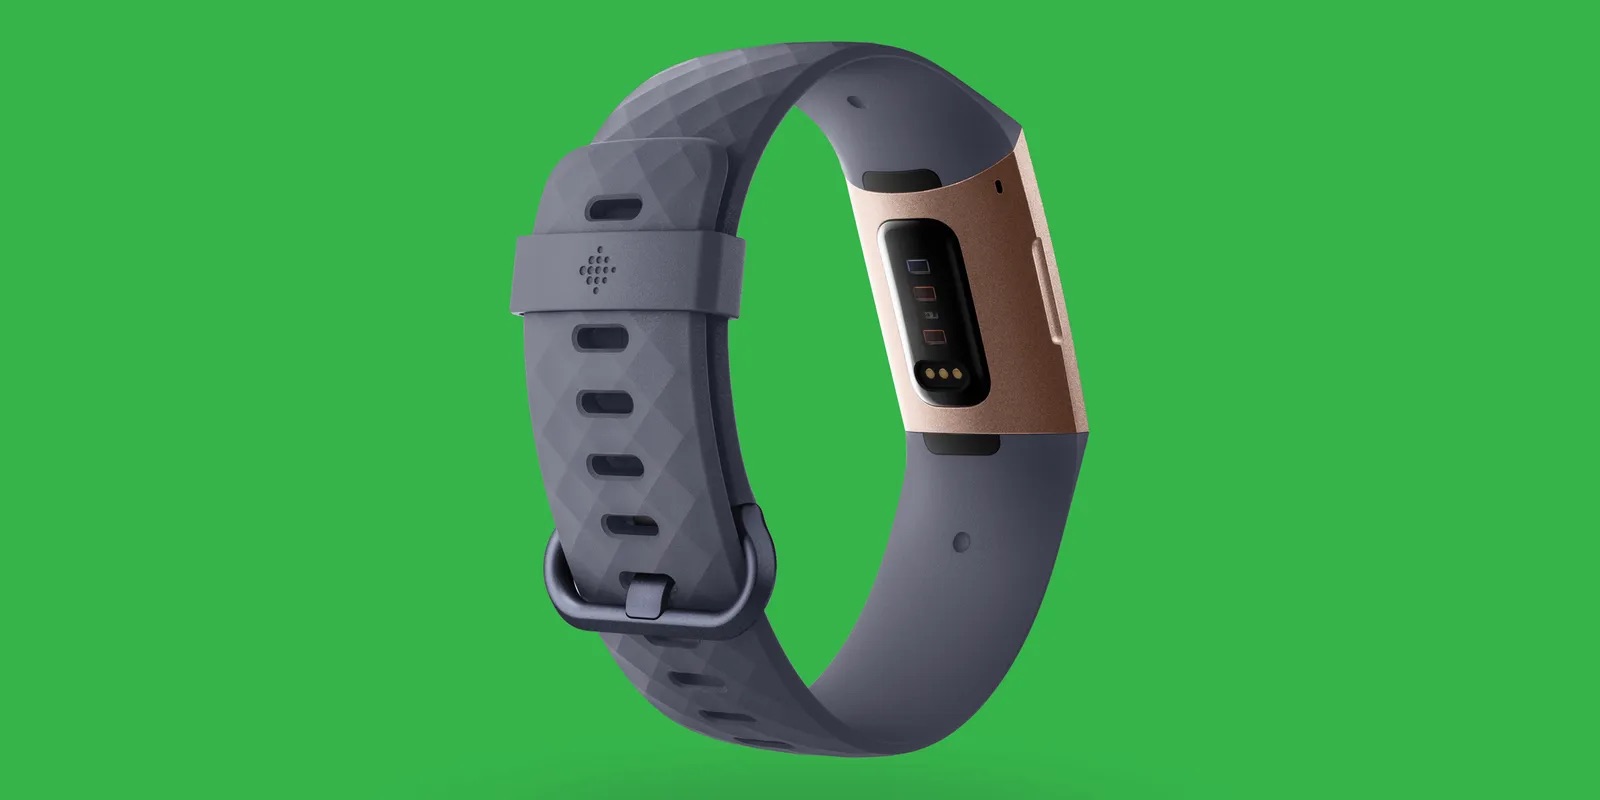 Dimming The Glow: Turning Off The Green Light On Your Fitbit